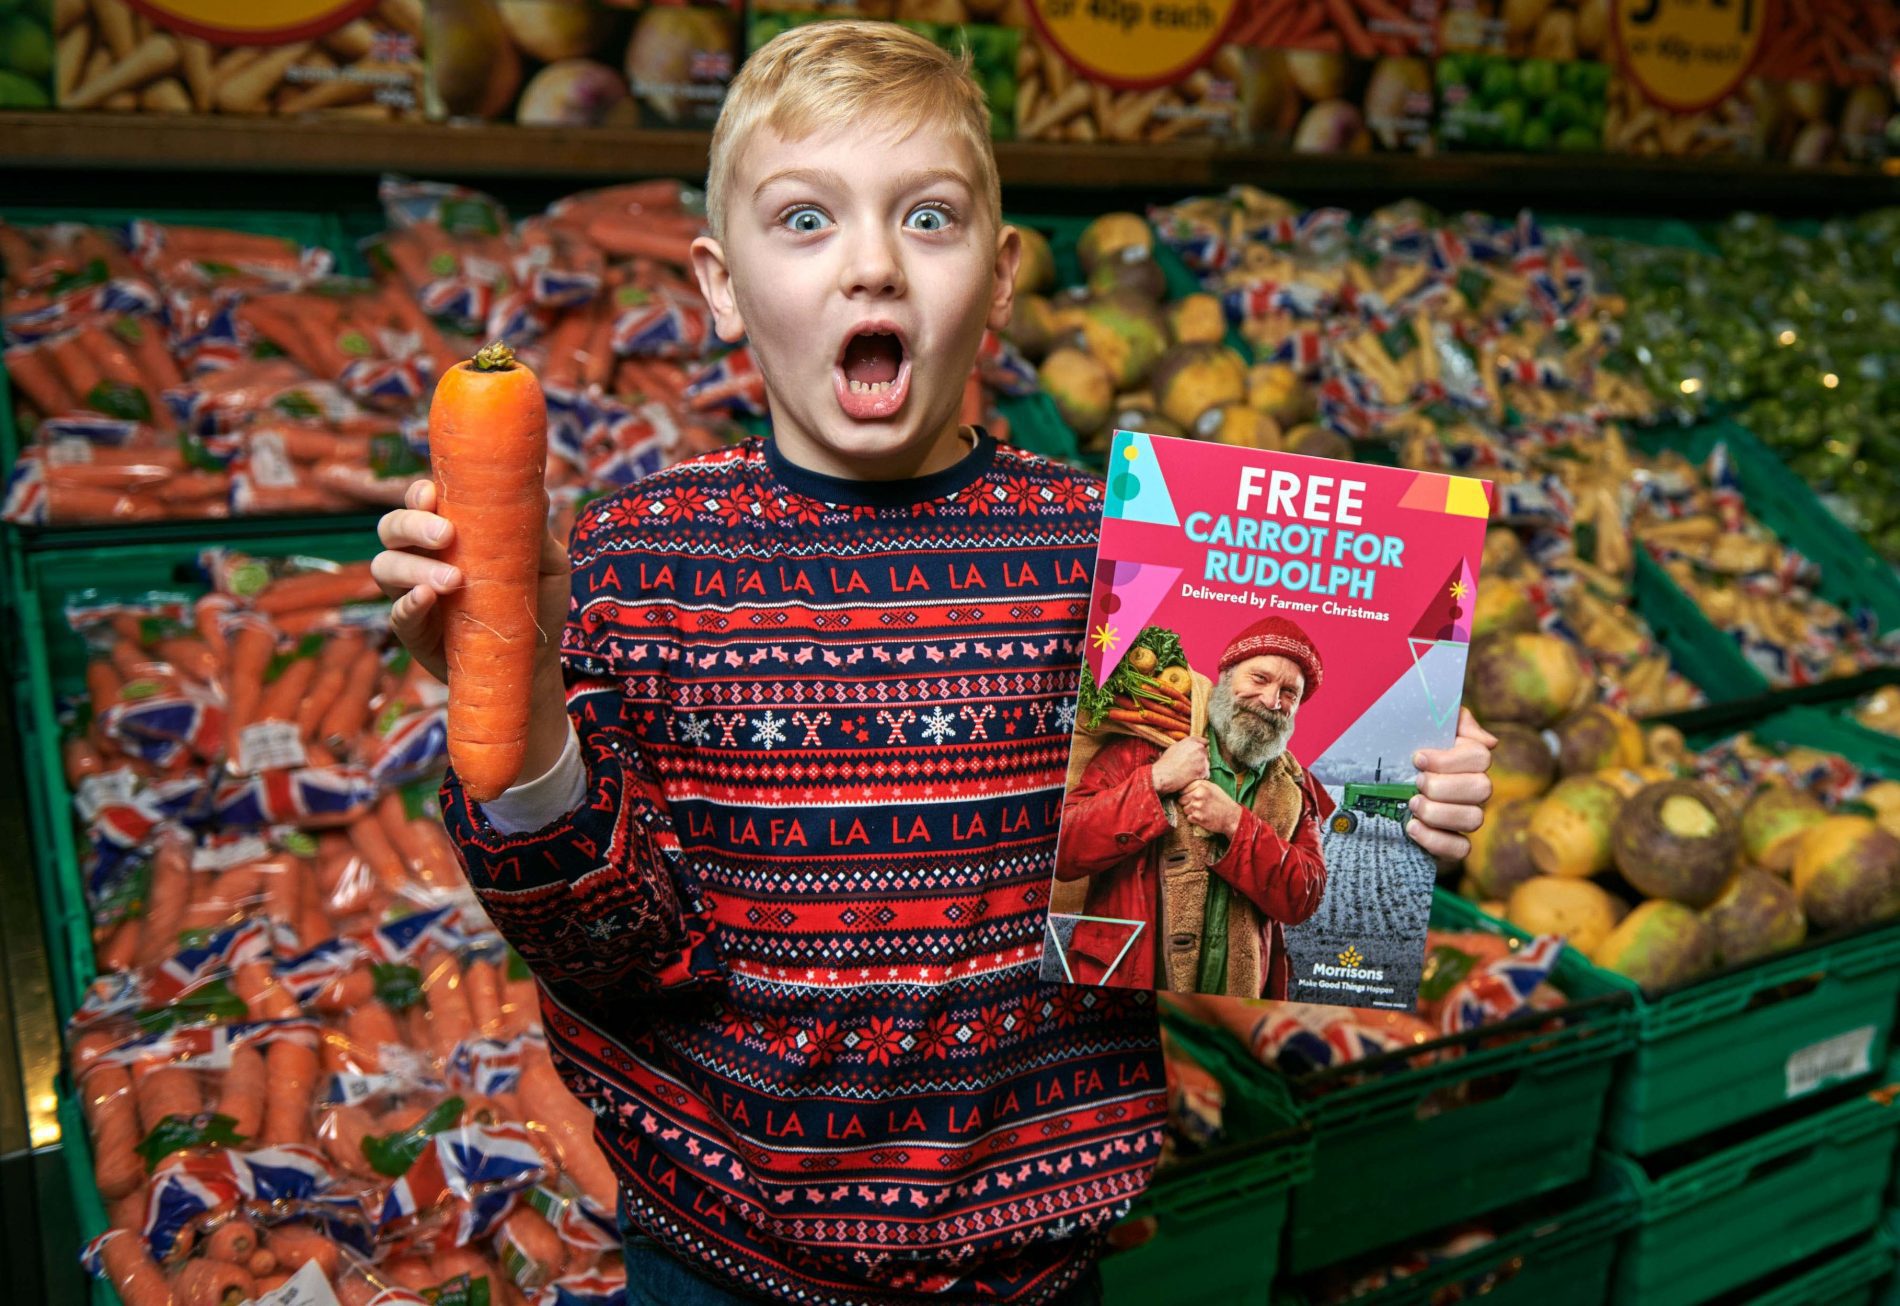 Morrisons and Tesco announce Christmas freebie as 'wonky' veg to